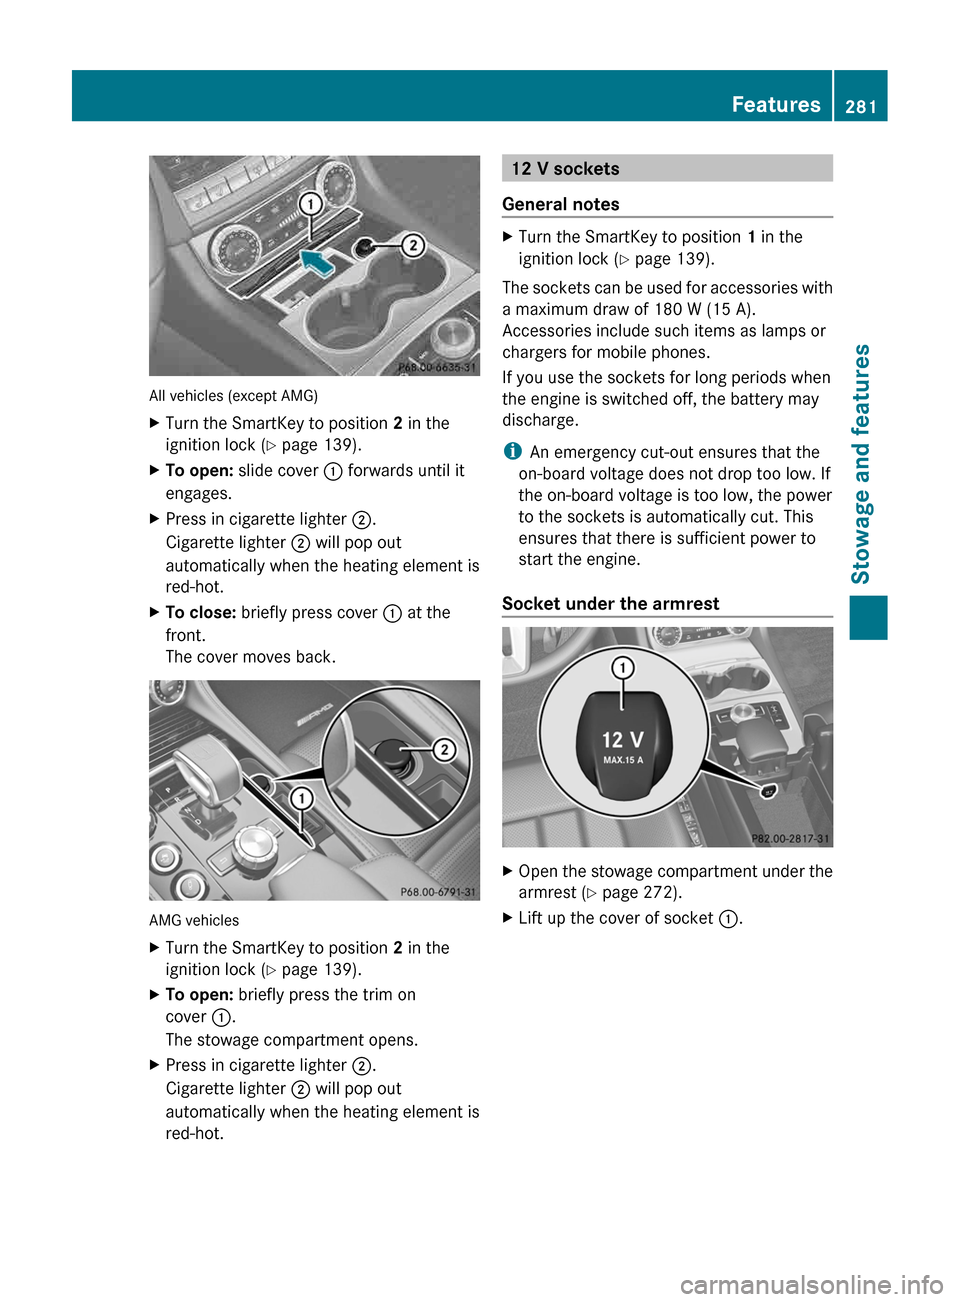 MERCEDES-BENZ CLS-Class 2013 W218 Service Manual All vehicles (except AMG)
X
Turn the SmartKey to position  2 in the
ignition lock ( Y page 139).
X To open: slide cover  : forwards until it
engages.
X Press in cigarette lighter ;.
Cigarette lighter 